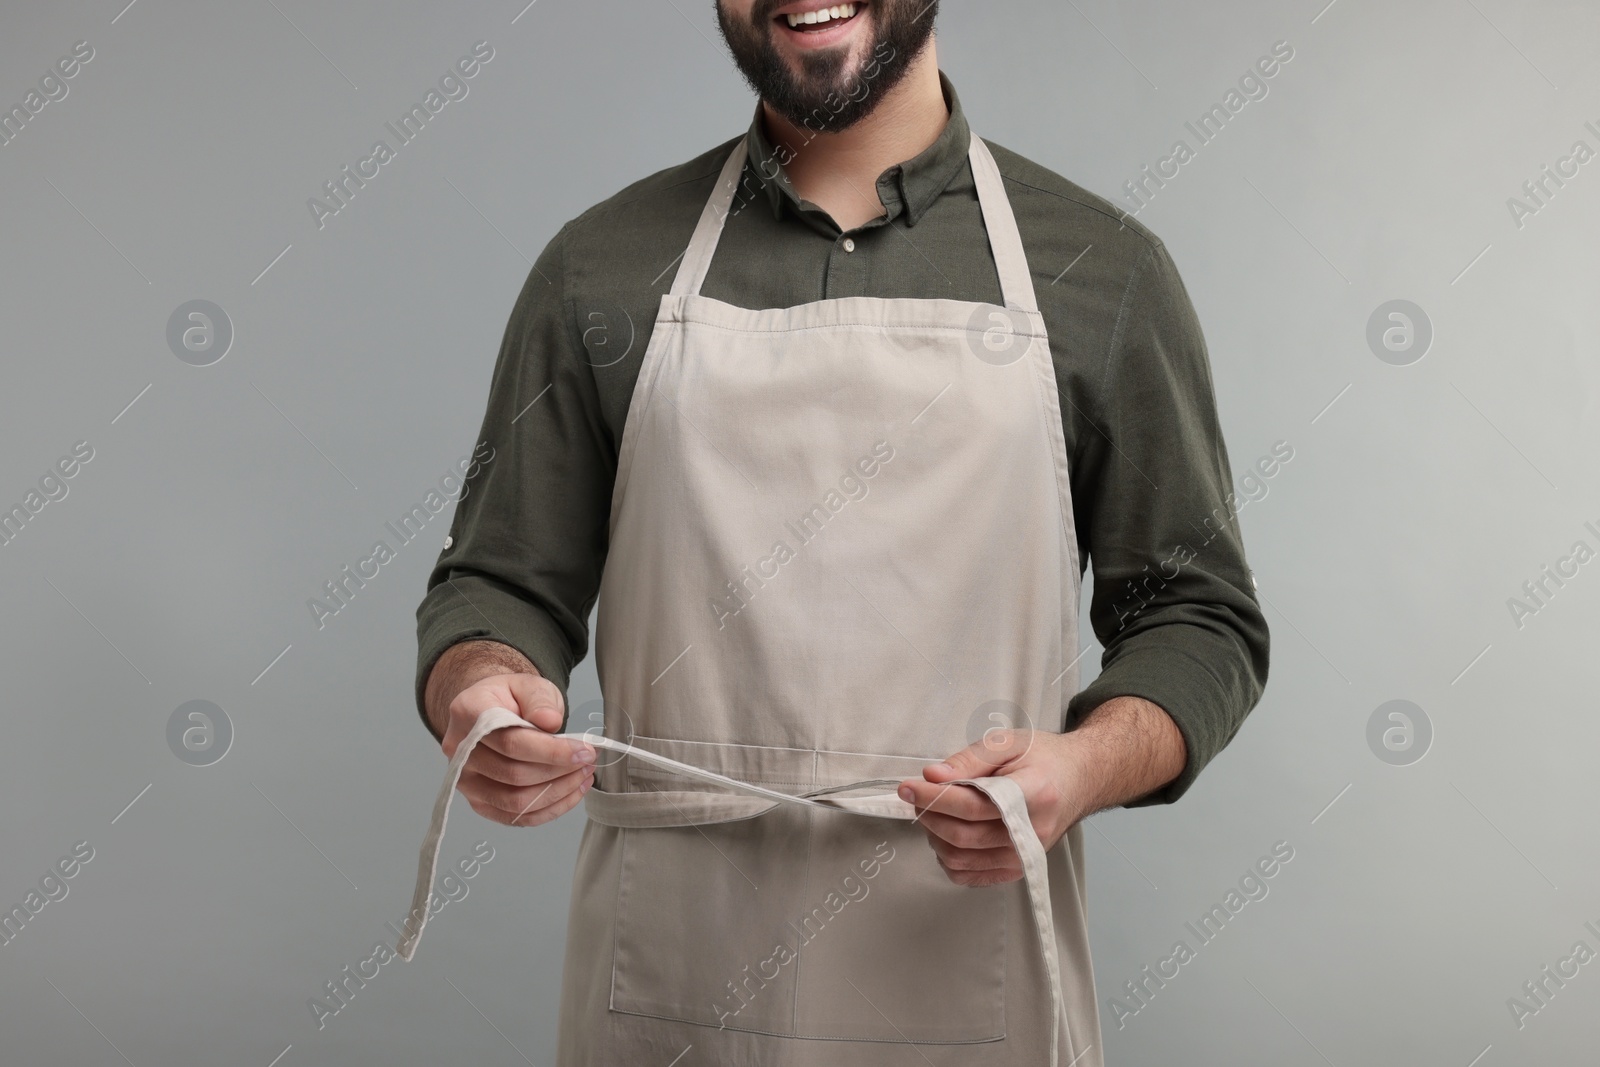 Photo of Smiling man in kitchen apron on grey background, closeup. Mockup for design